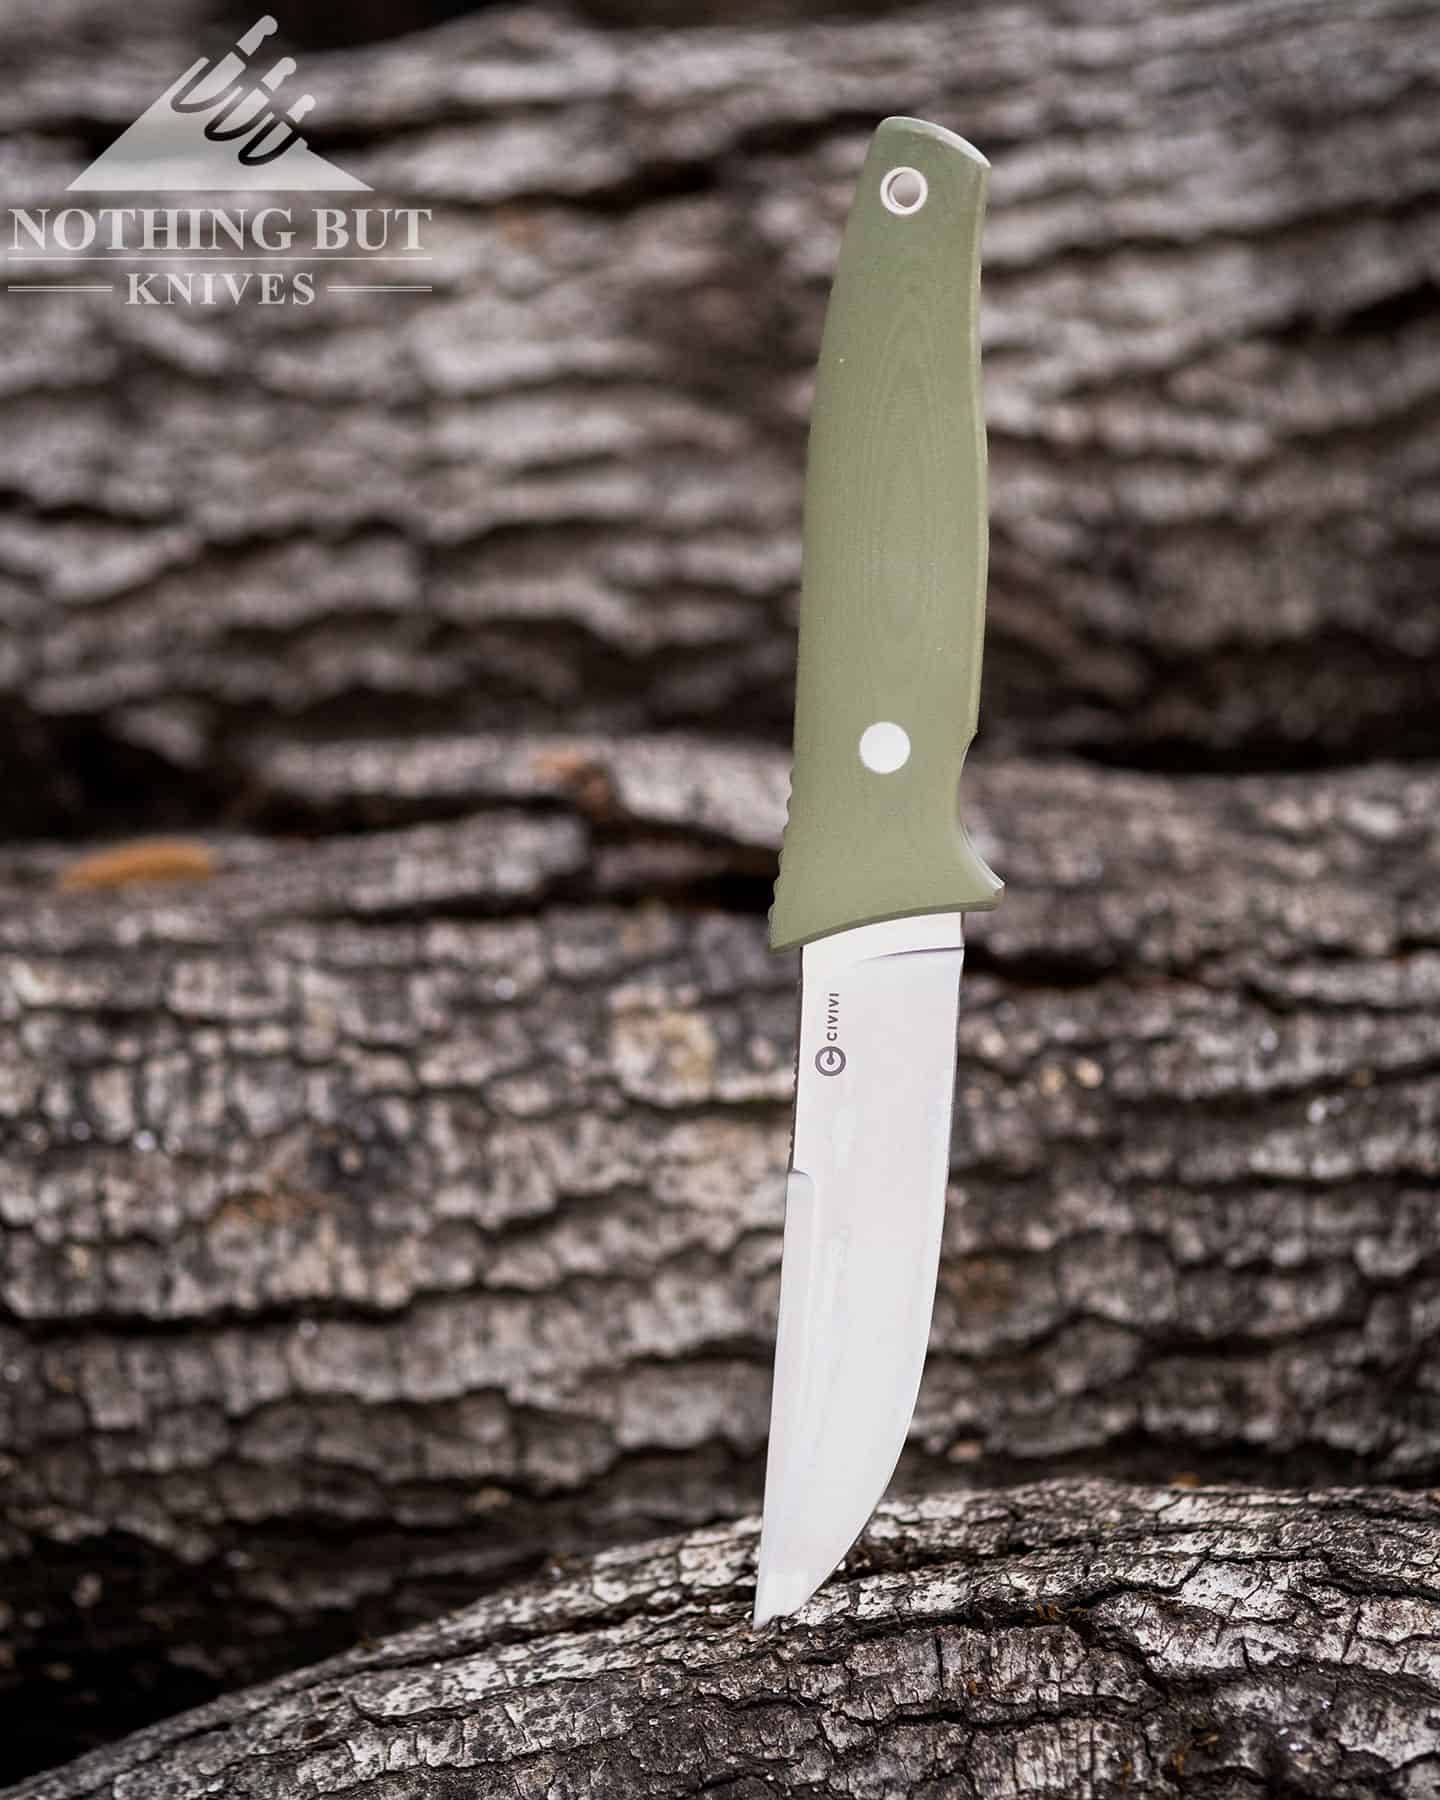 The Civivi Tamashii has a good look, but it also has a versatile sheath and a practical design.